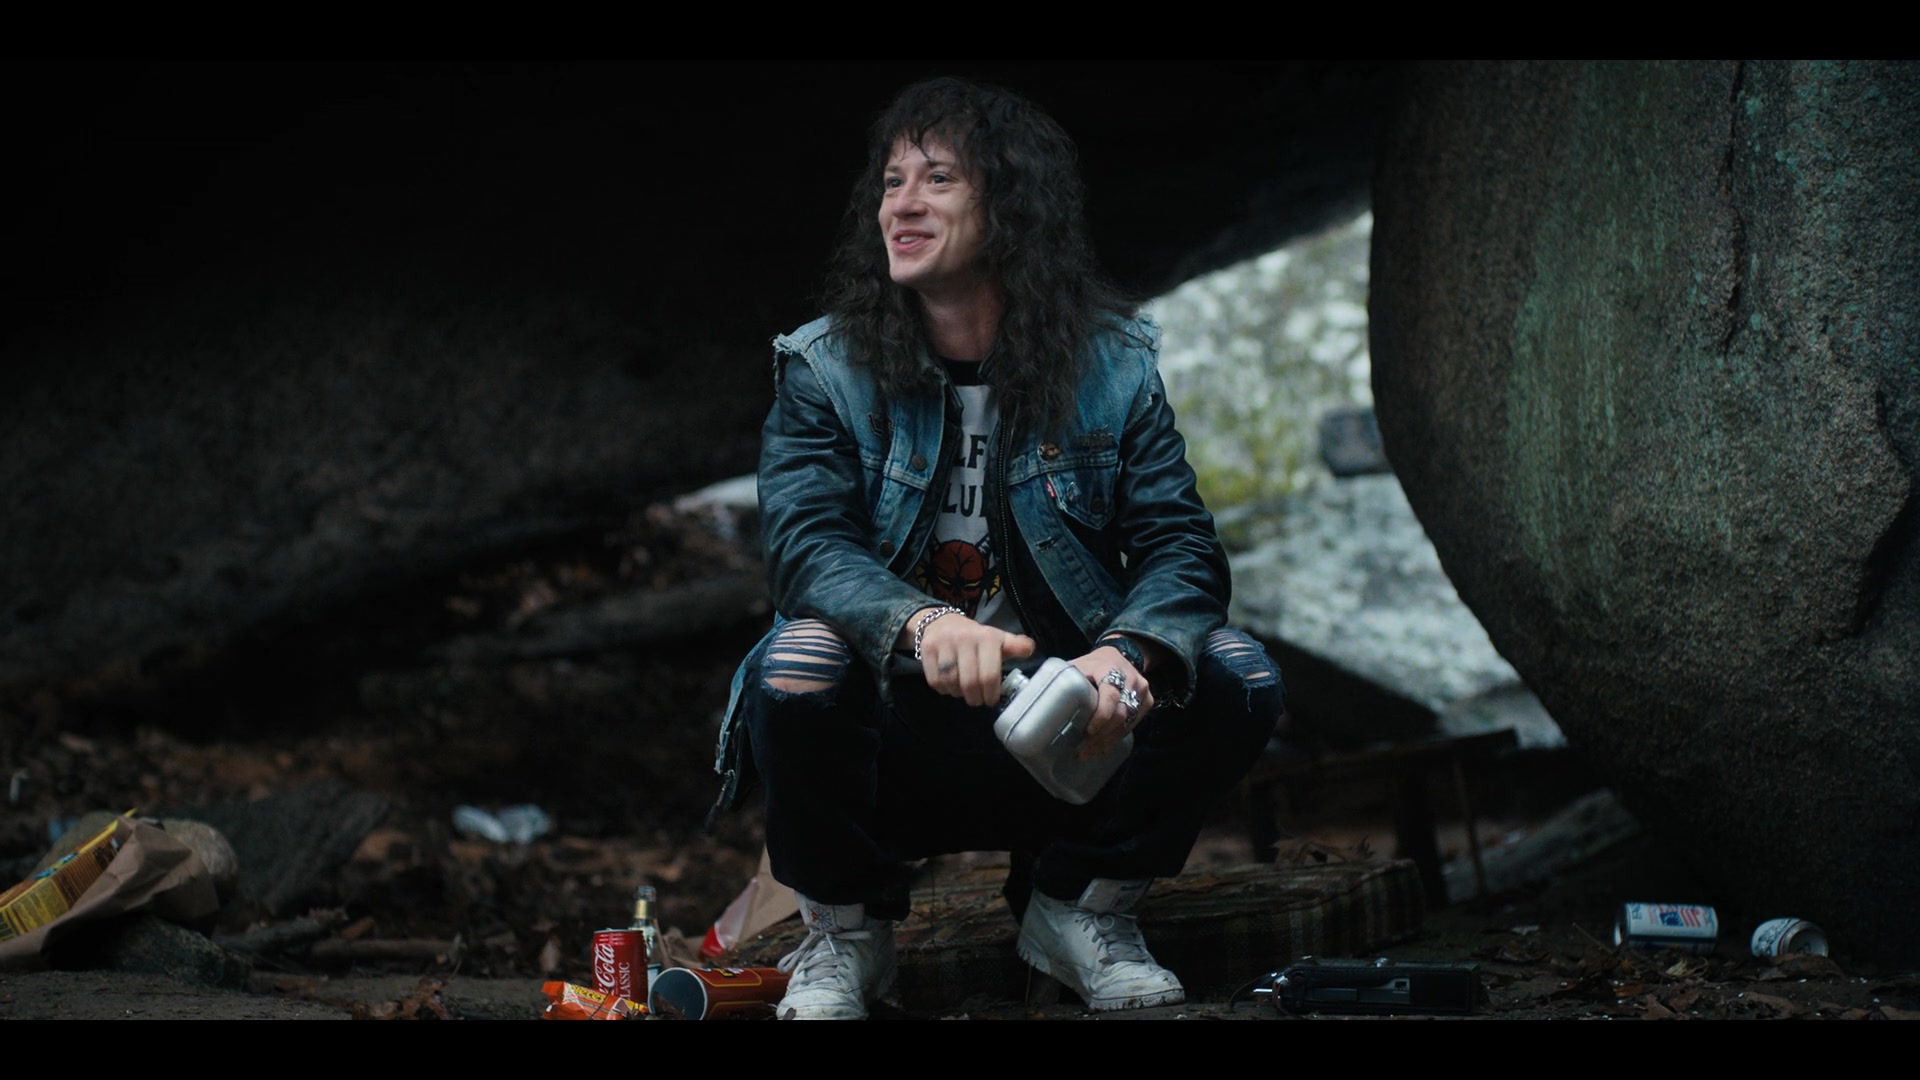 Reebok Men's Shoes Of Joseph Quinn As Eddie Munson And Coca Cola Classic Can In Stranger Things S04E06 Chapter Six: The Dive (2022)